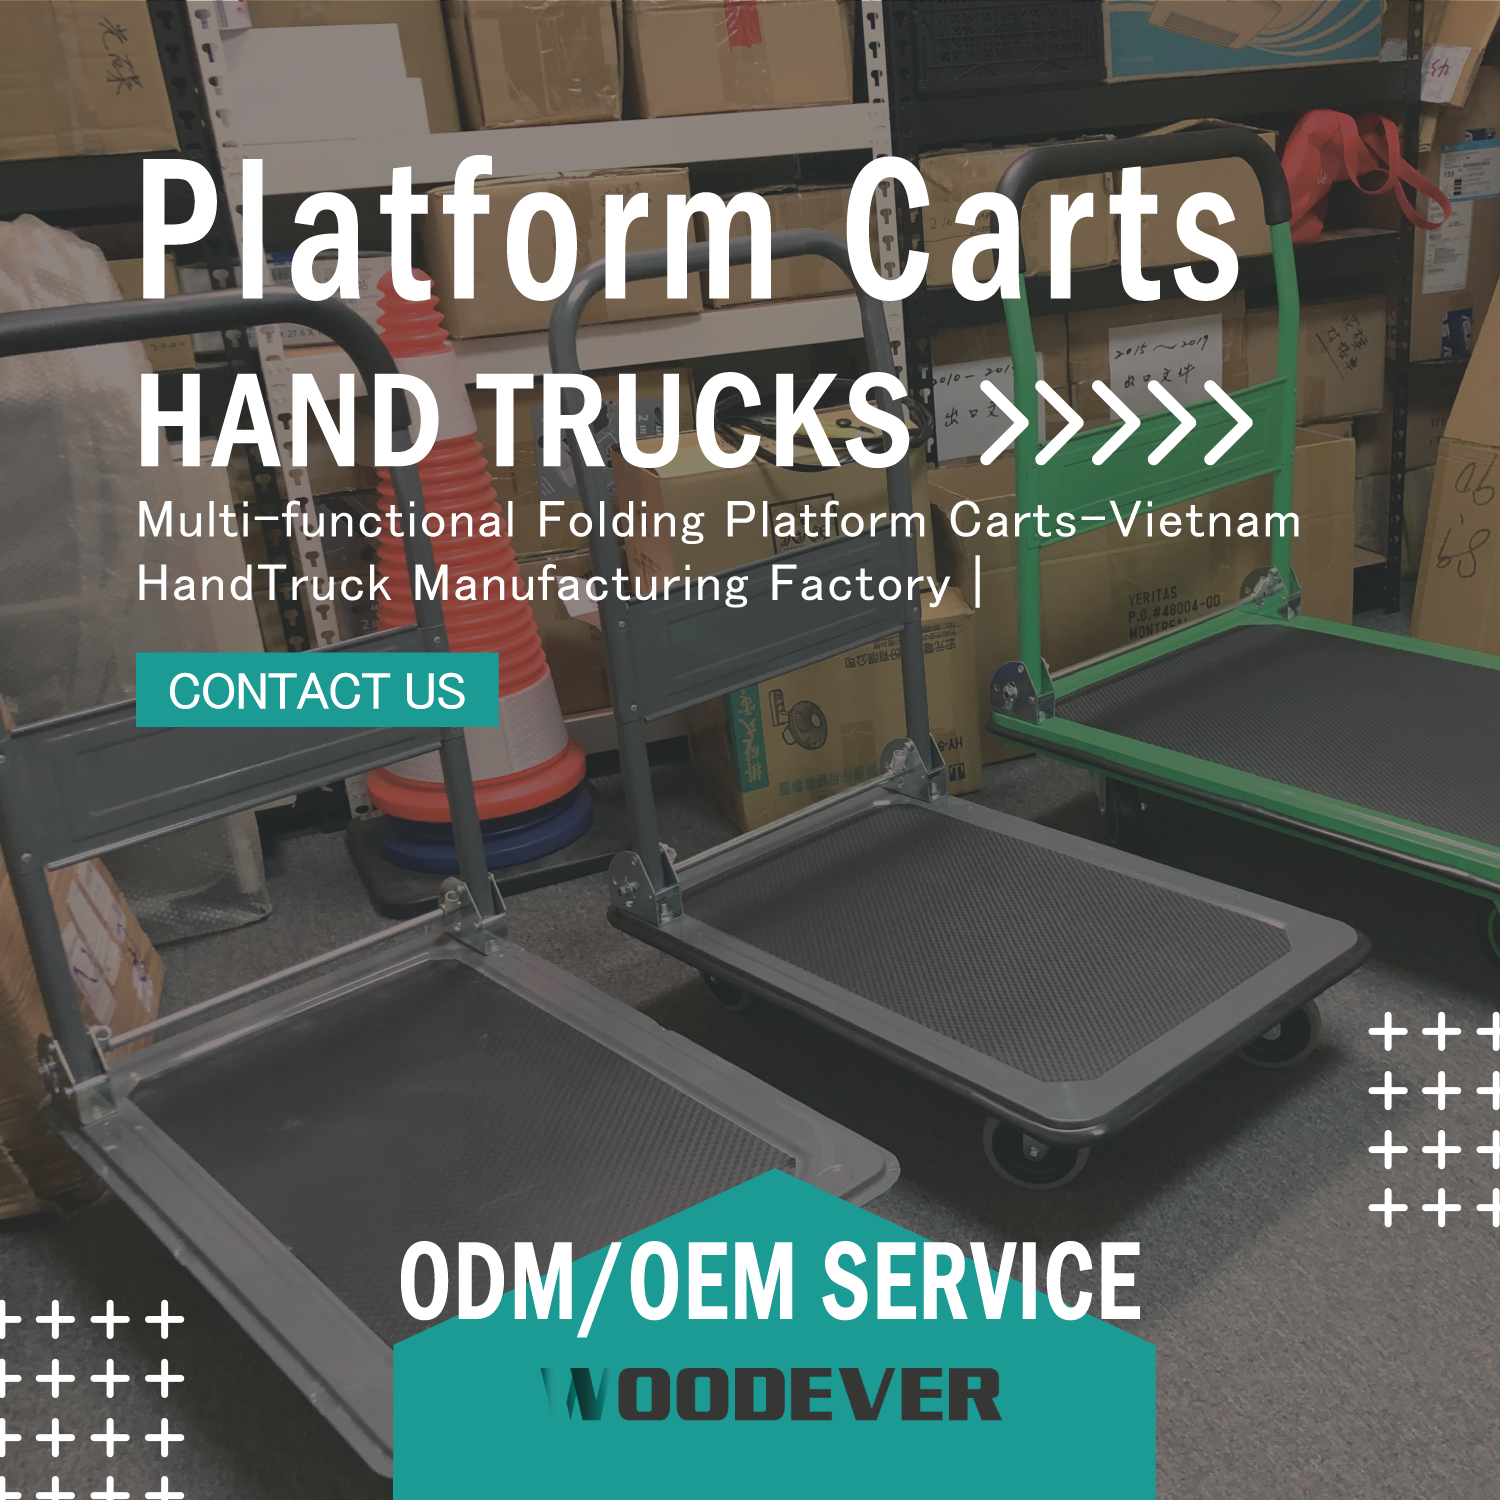 OEM service for different types of platform carts featuring: adjustable platform and handle with the loading capacity ranging from 150kg (330lbs) to 300 kg (660lbs). WOODEVER professional Folding Platform Carts, supplying the global large-scale store platform, exporting flatbed folding hand truck cart for more than 20 years of experience, to provide high-quality one-stop folding hand truck service.